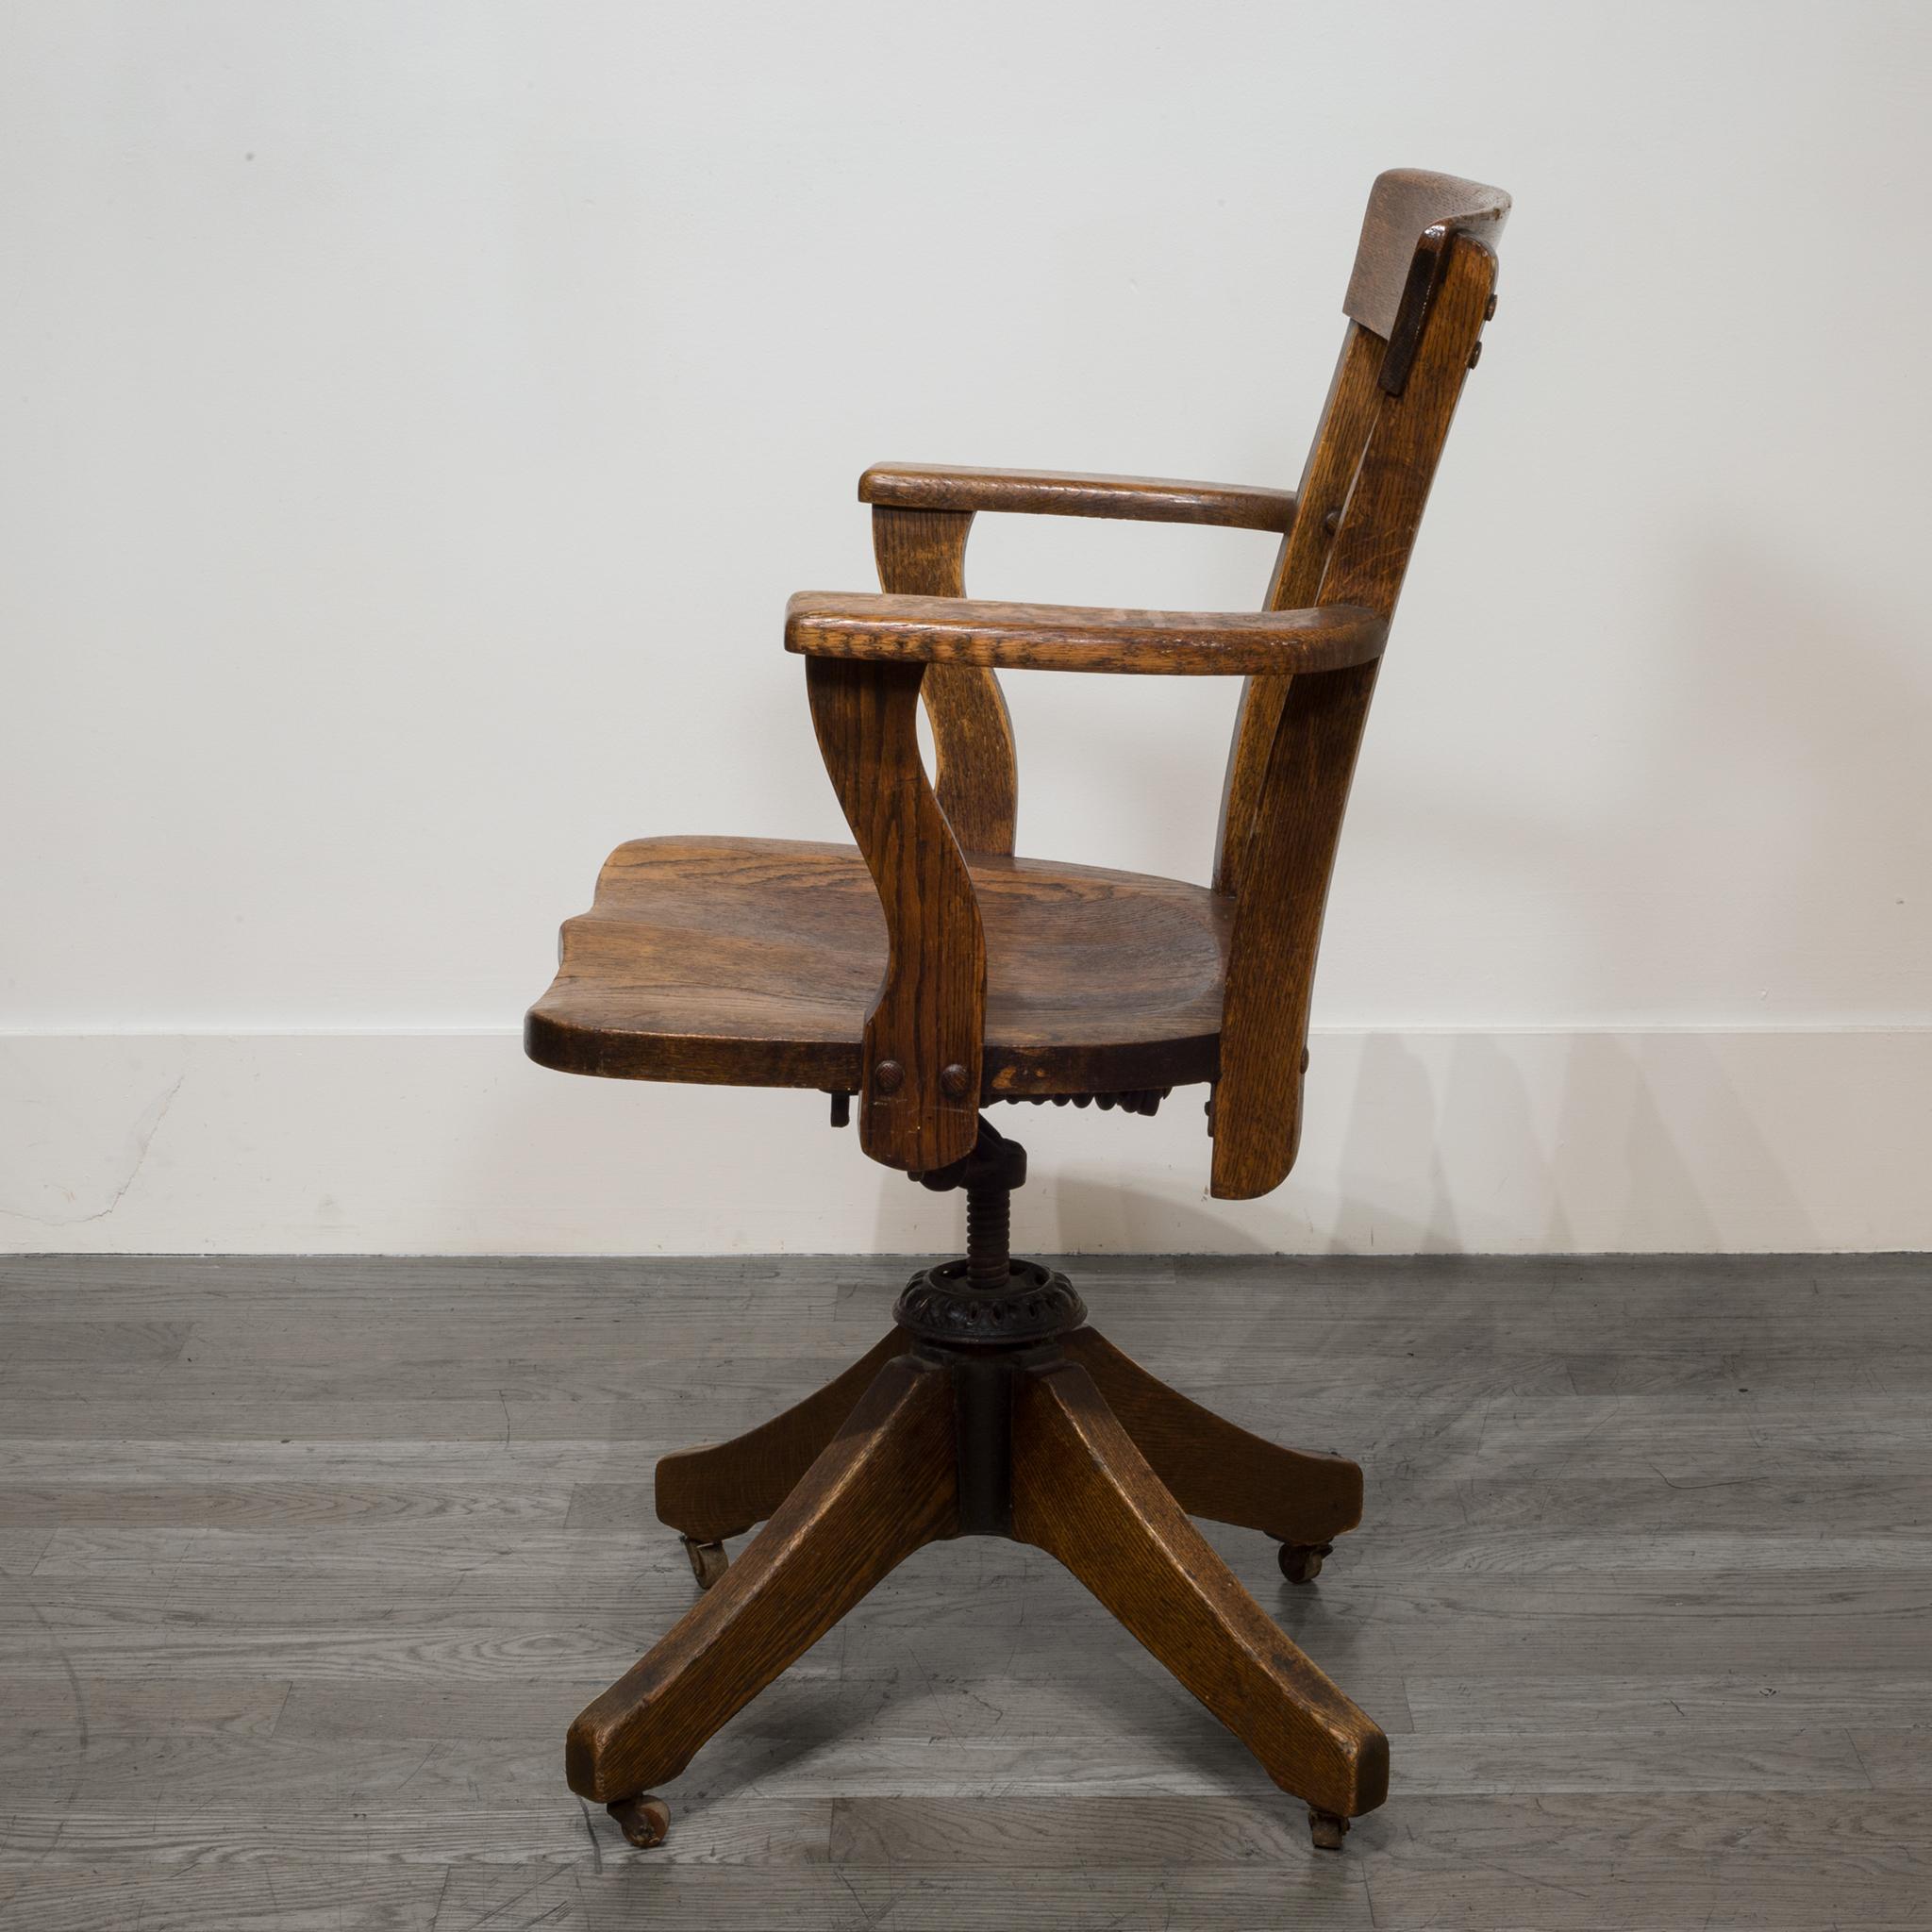 About

This is an original solid Oak desk chair with cast iron mechanism. This chair swivels, tilts back and the height is adjustable. This chair has retained its original finish and has minor structural damage.

Creator Unknown.
Date of